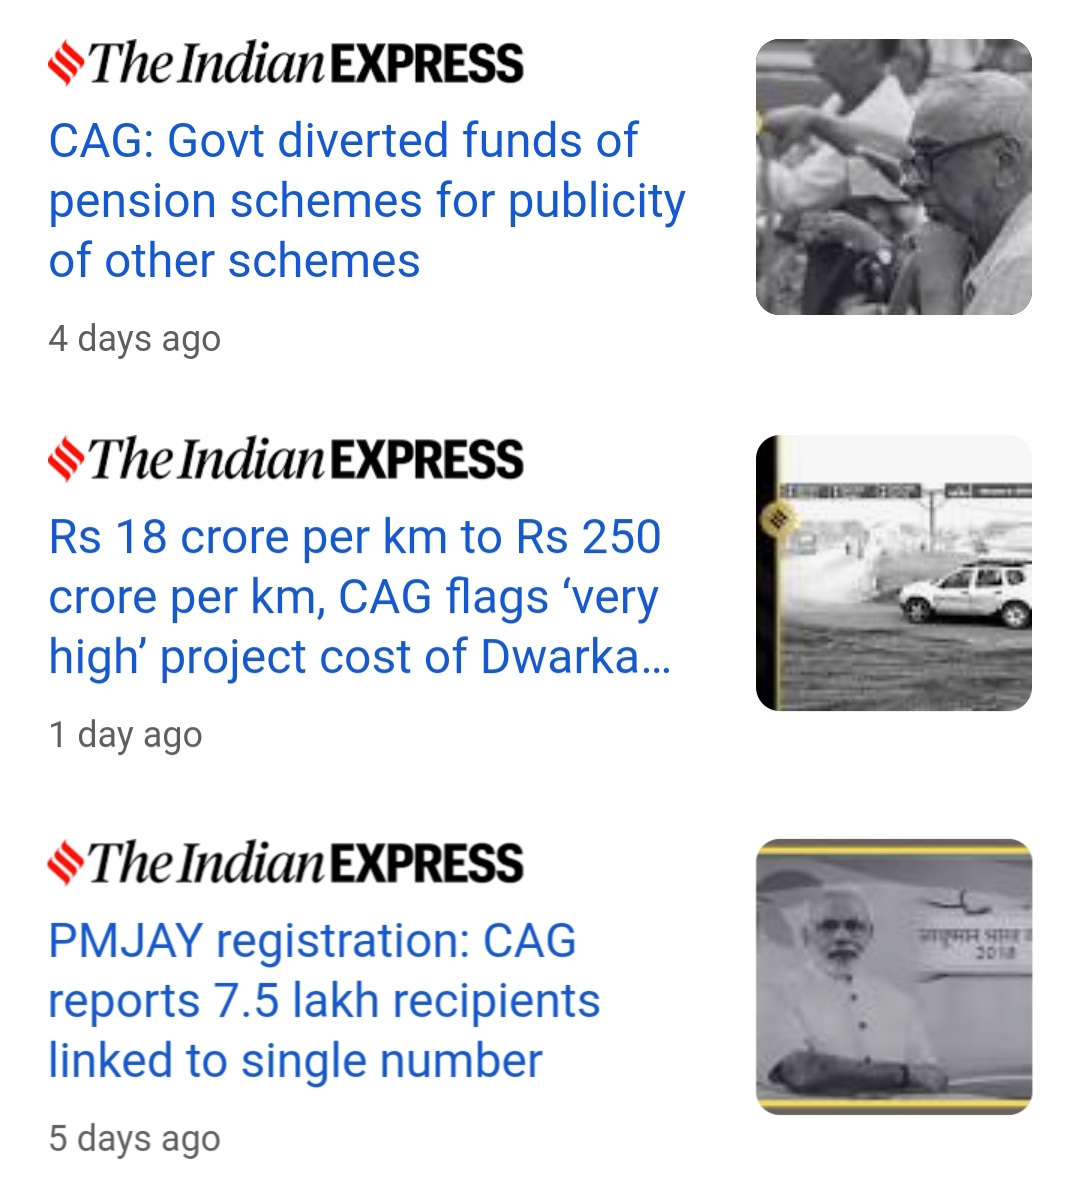 In the last 05 days, • CAG has flagged Pension funds. • CAG has flagged PMJAY. • CAG flagged Dwarka E-way. But there are no debates or outrage in the media about CAG findings. The silence of the fourth pillar of Indian democracy is deafening.